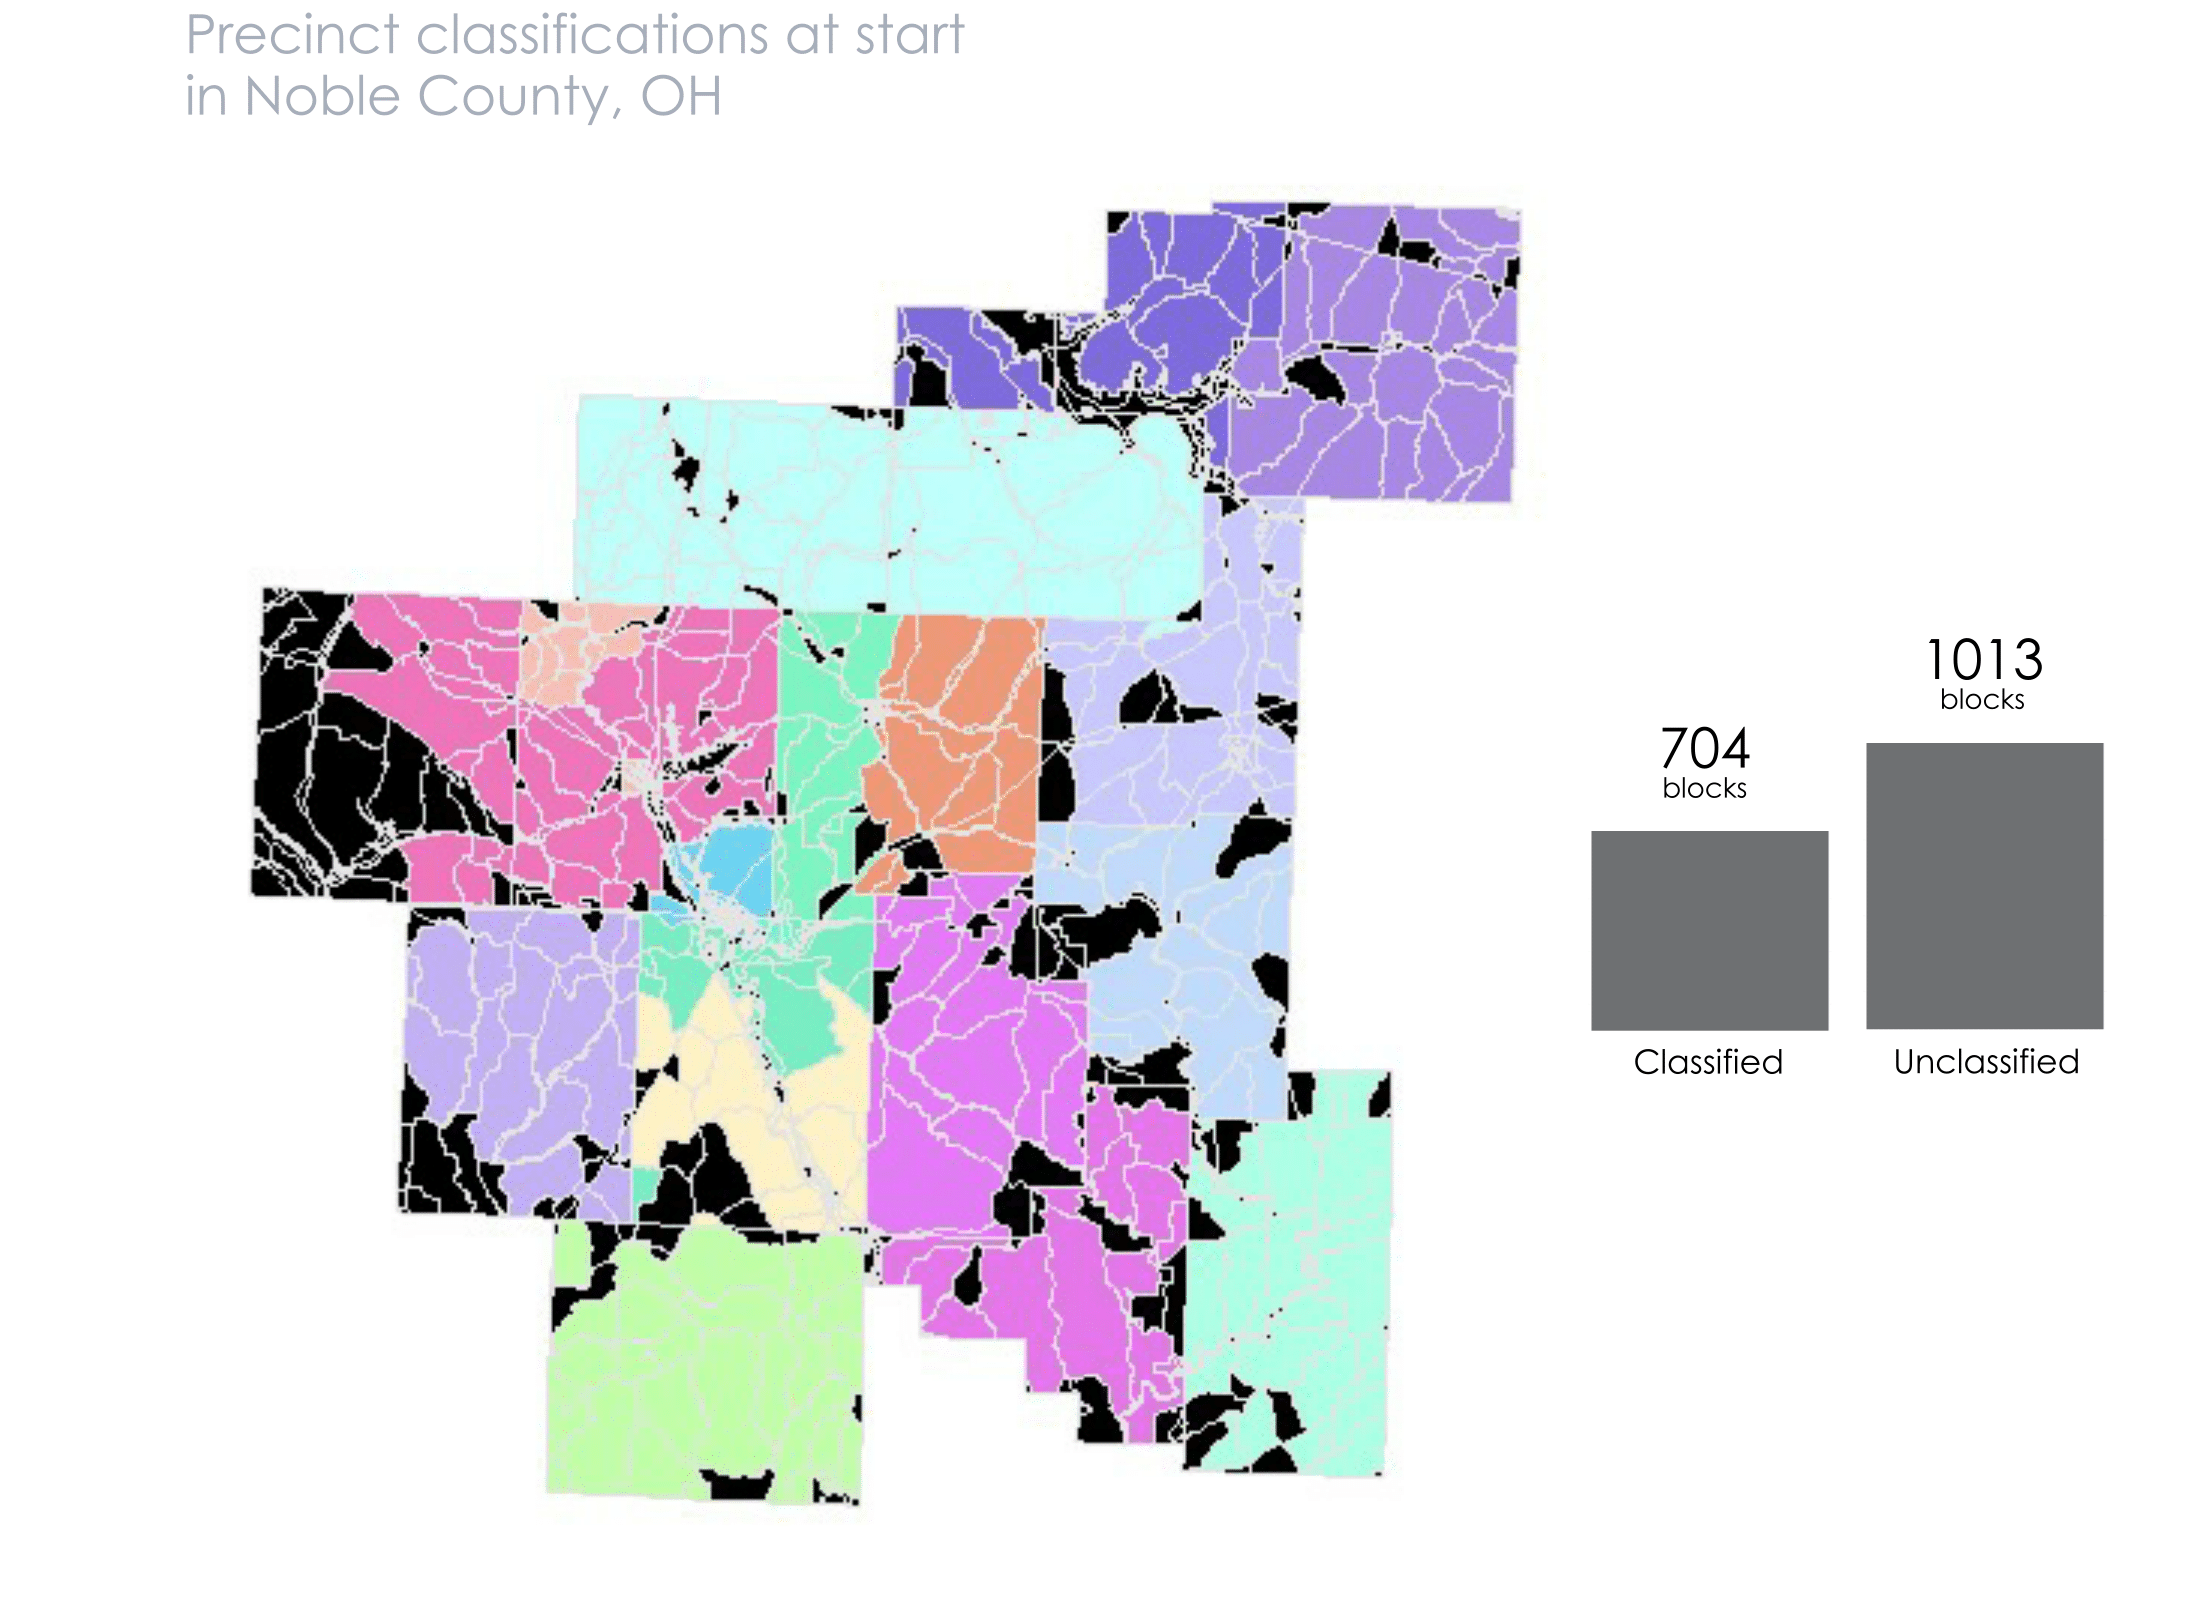 GIF of interations to built precinct shapefile in Noble County